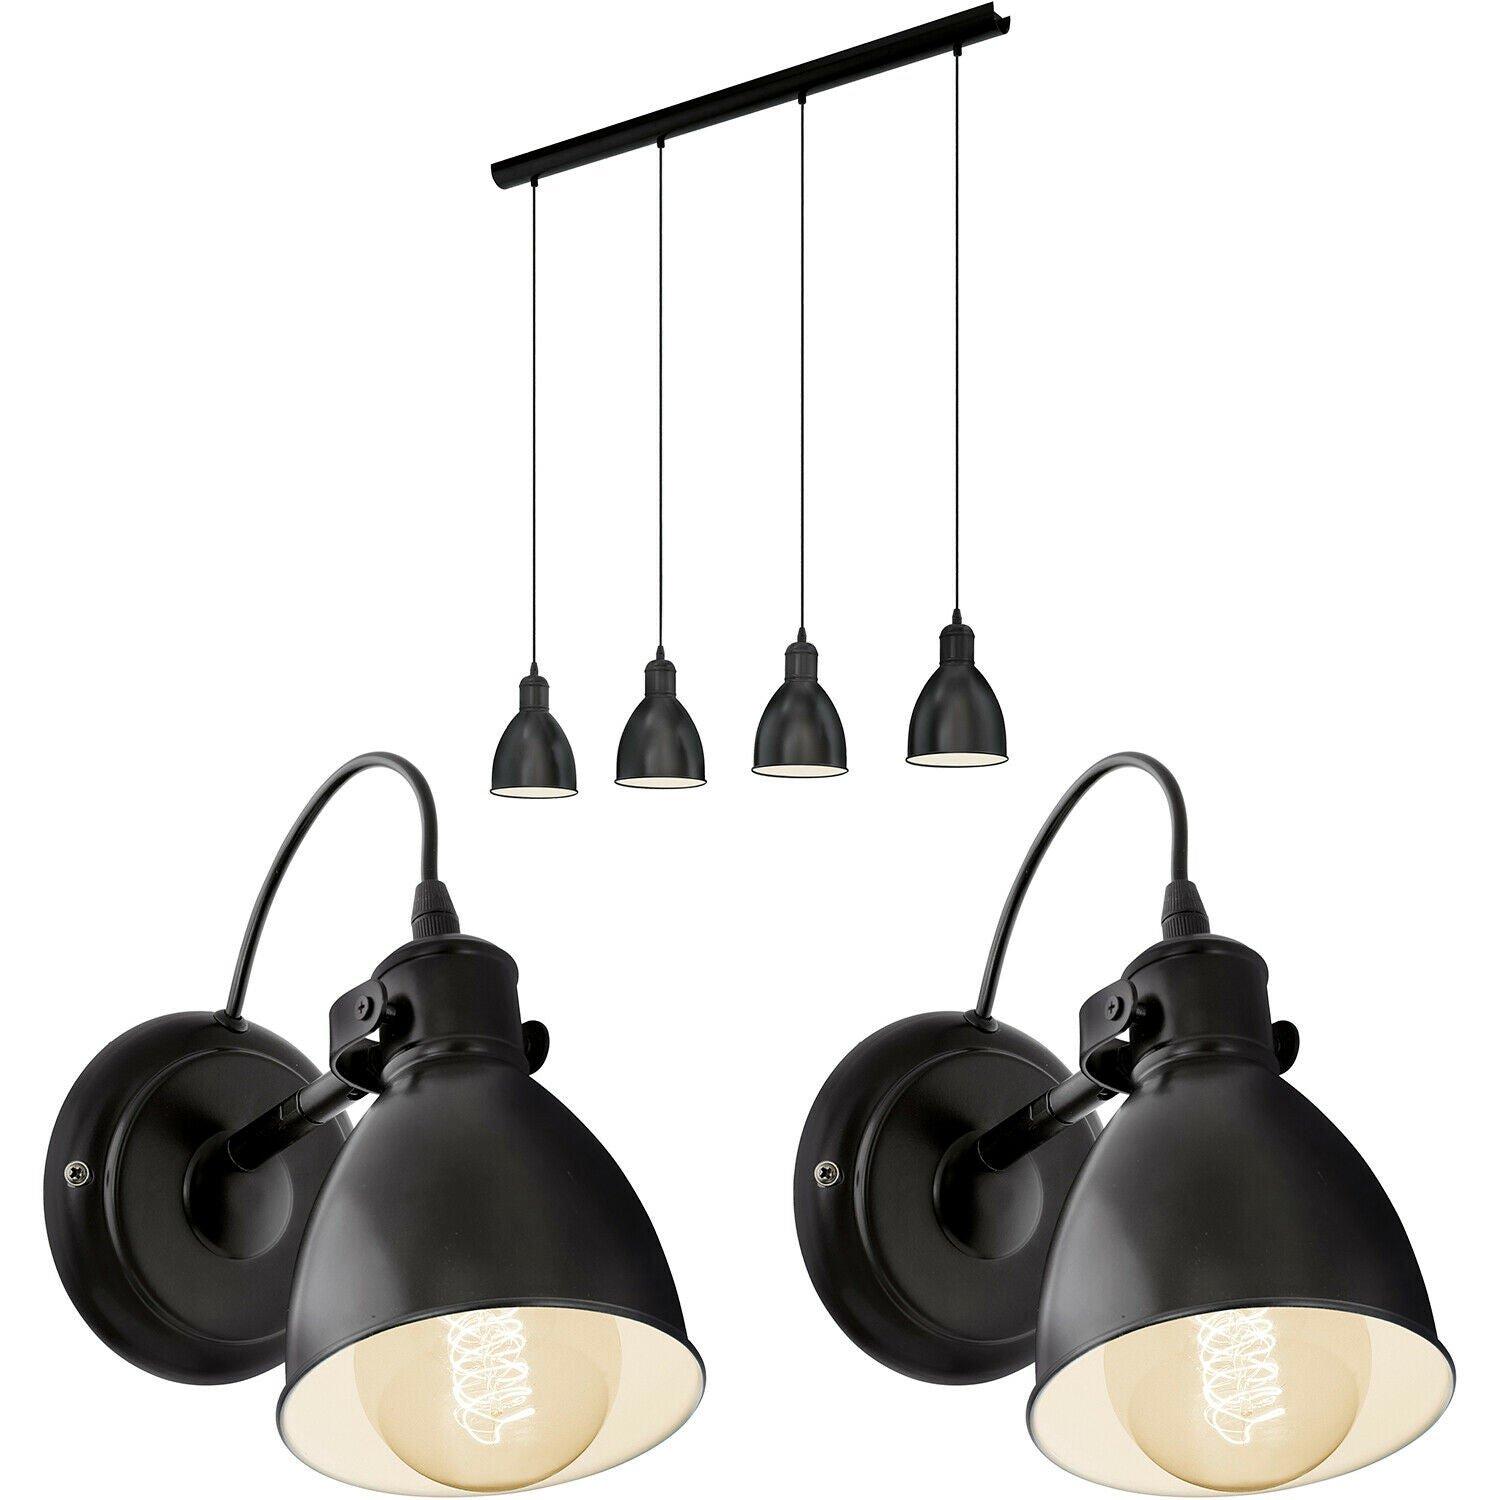 Quad Ceiling Light & 2x Matching Wall Lights Black Industrial Hanging Trendy